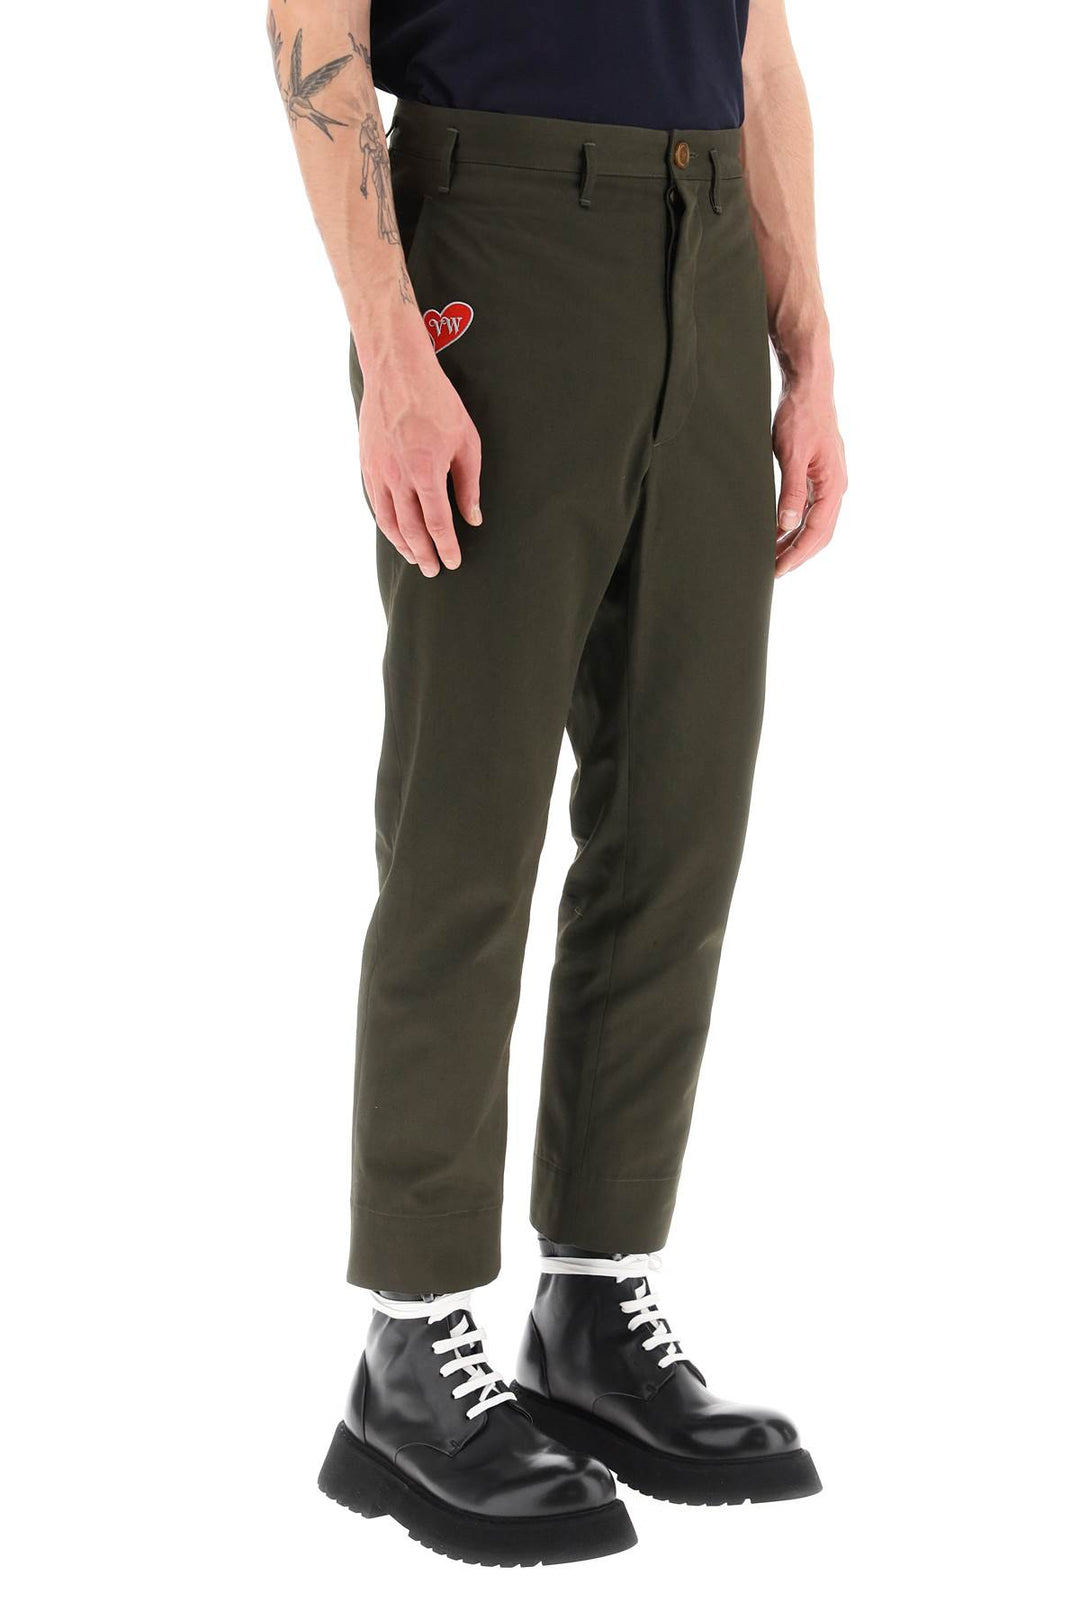 Vivienne Westwood Cropped Cruise Pants Featuring Embroidered Heart Shaped Logo   Verde